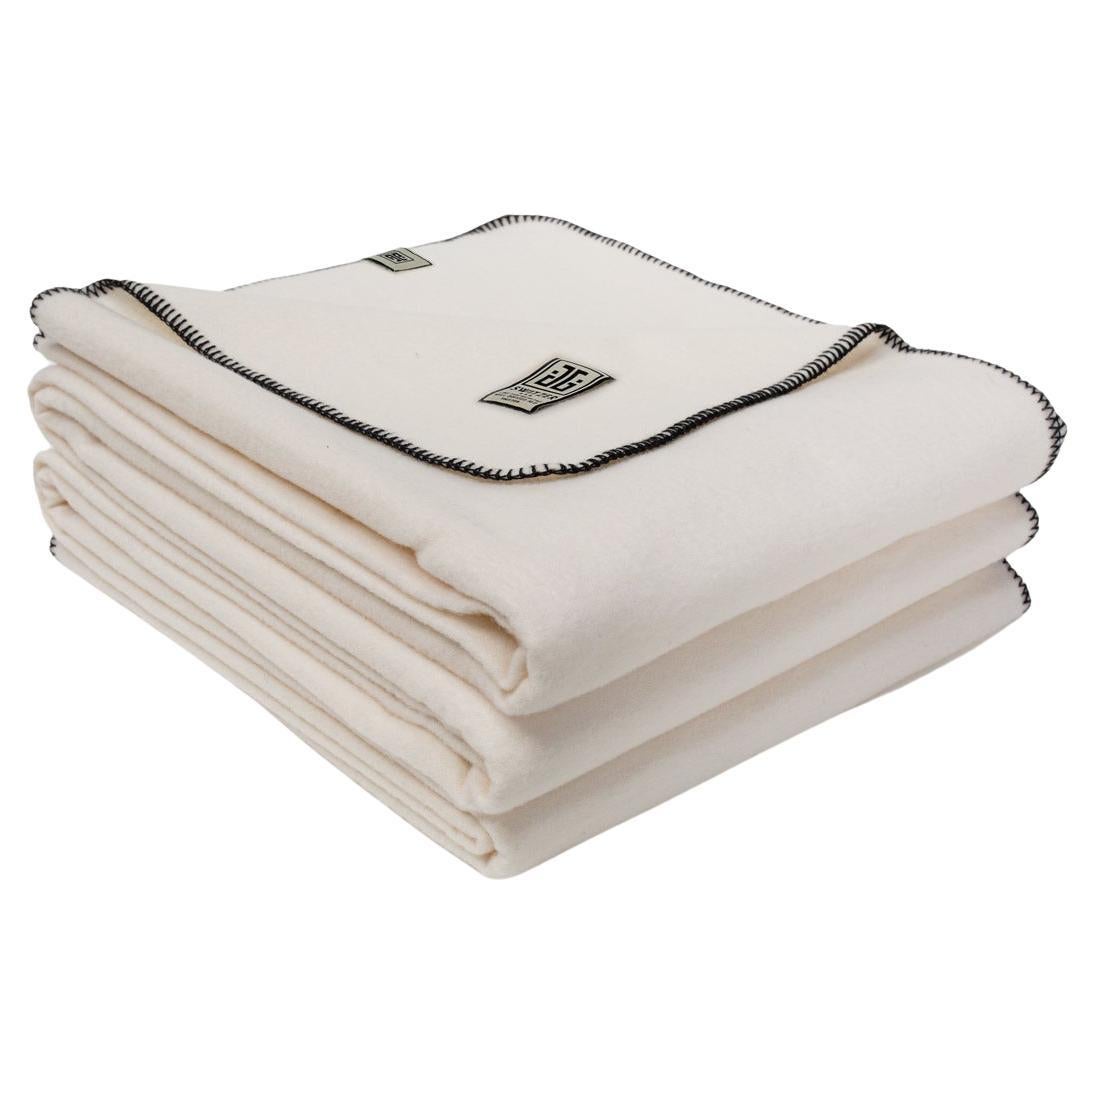 JG Switzer Classic Blanket in White Cashmere, King For Sale